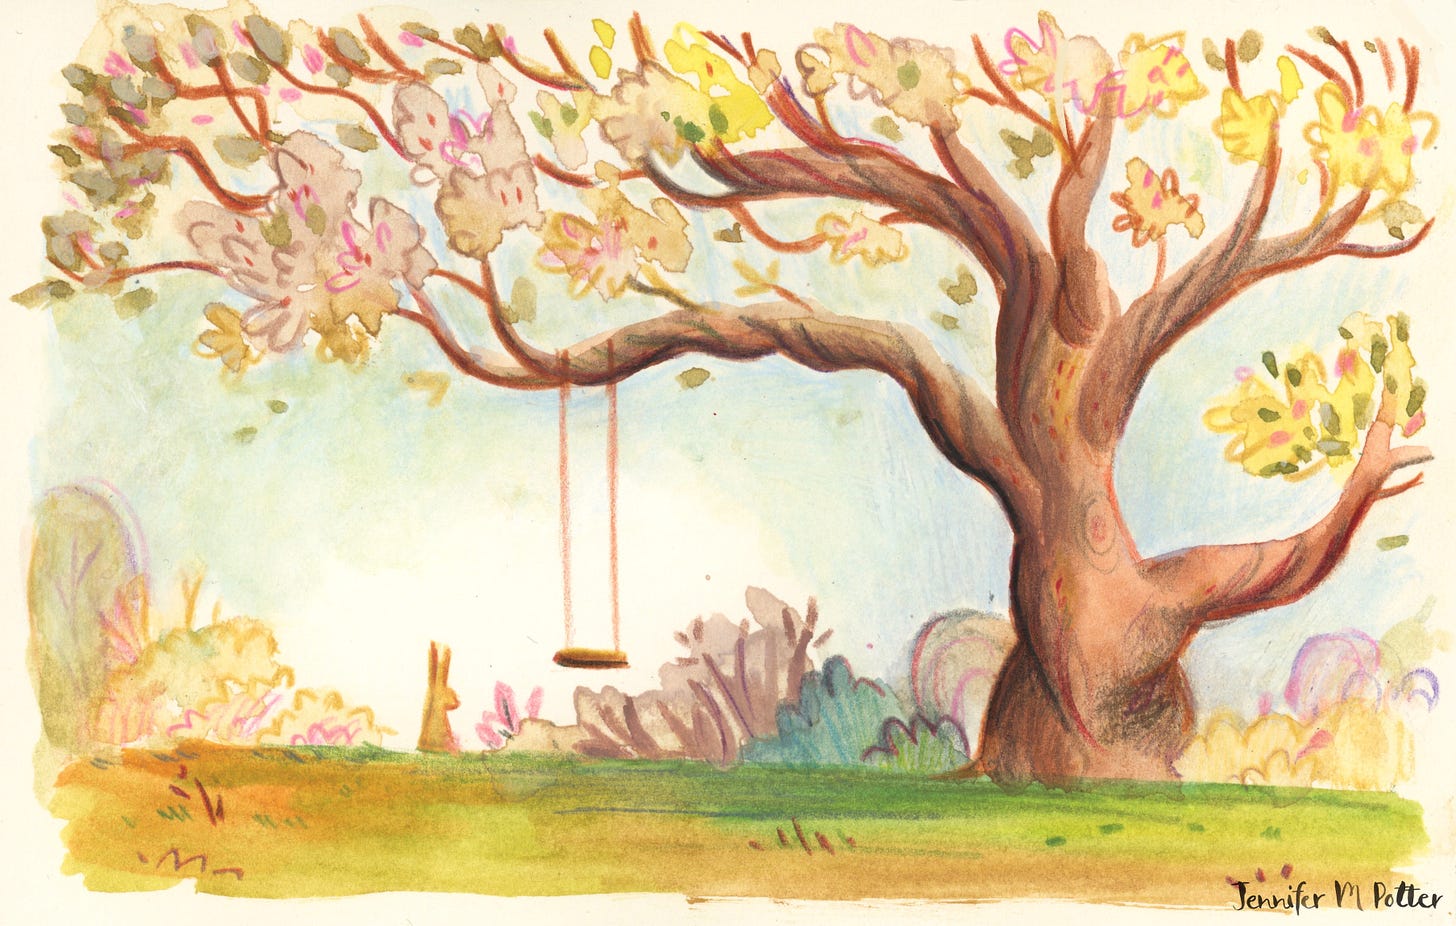 Illustration by Jennifer M Potter of a meadow with a tree and a rope swing